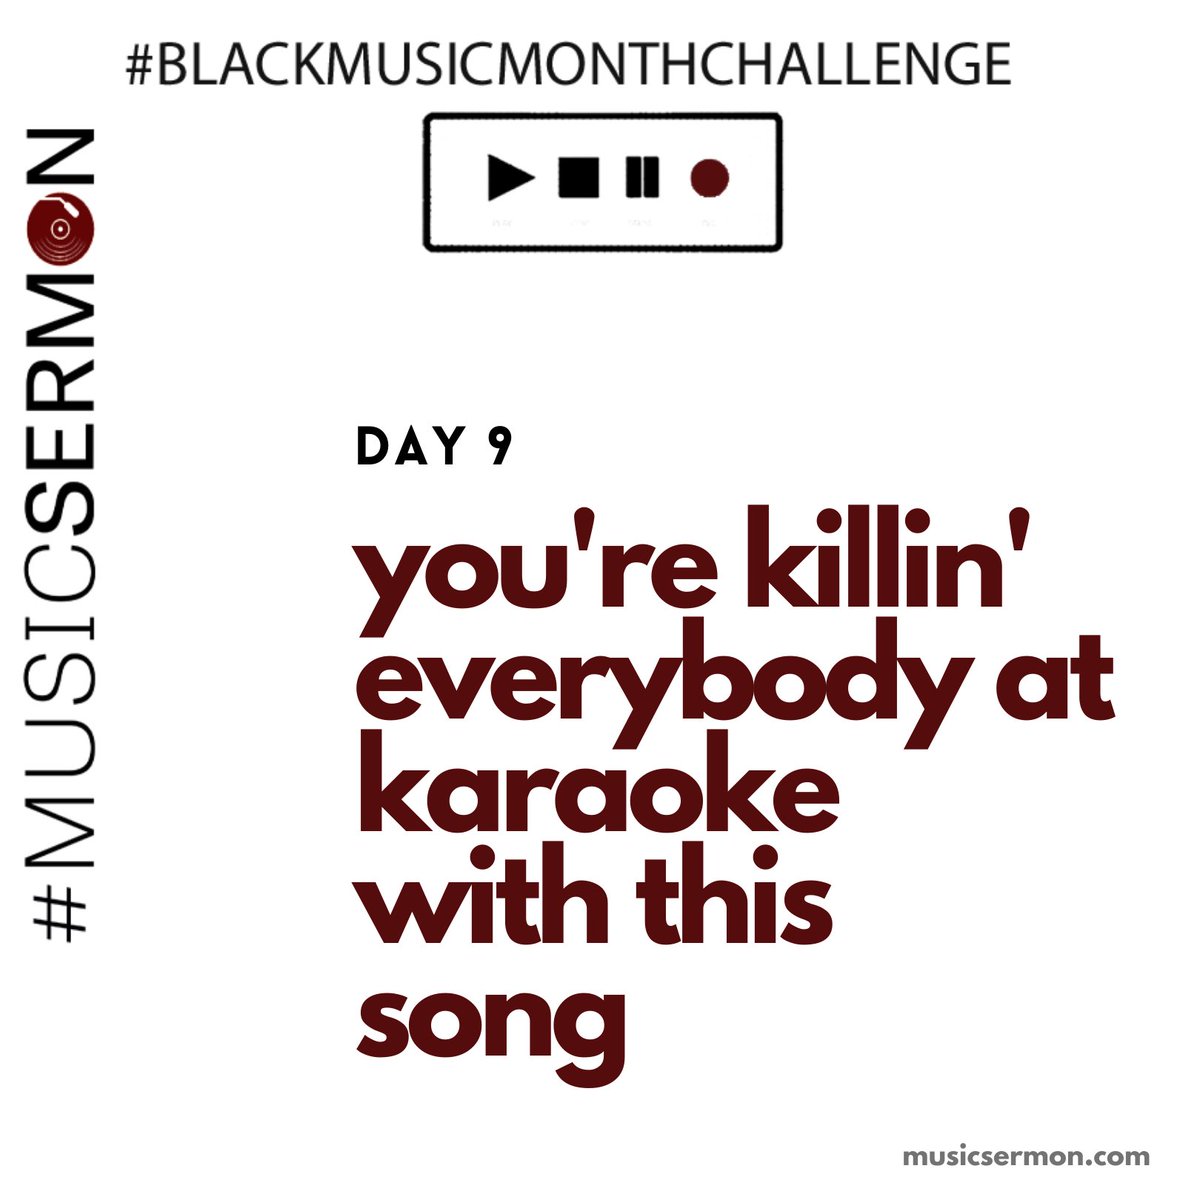 Day 9 of the  #BlackMusicMonthChallenge is a real one for me. As many of you know, I take karaoke very seriously. When it’s your turn to take the mic, what’s your go-to song?